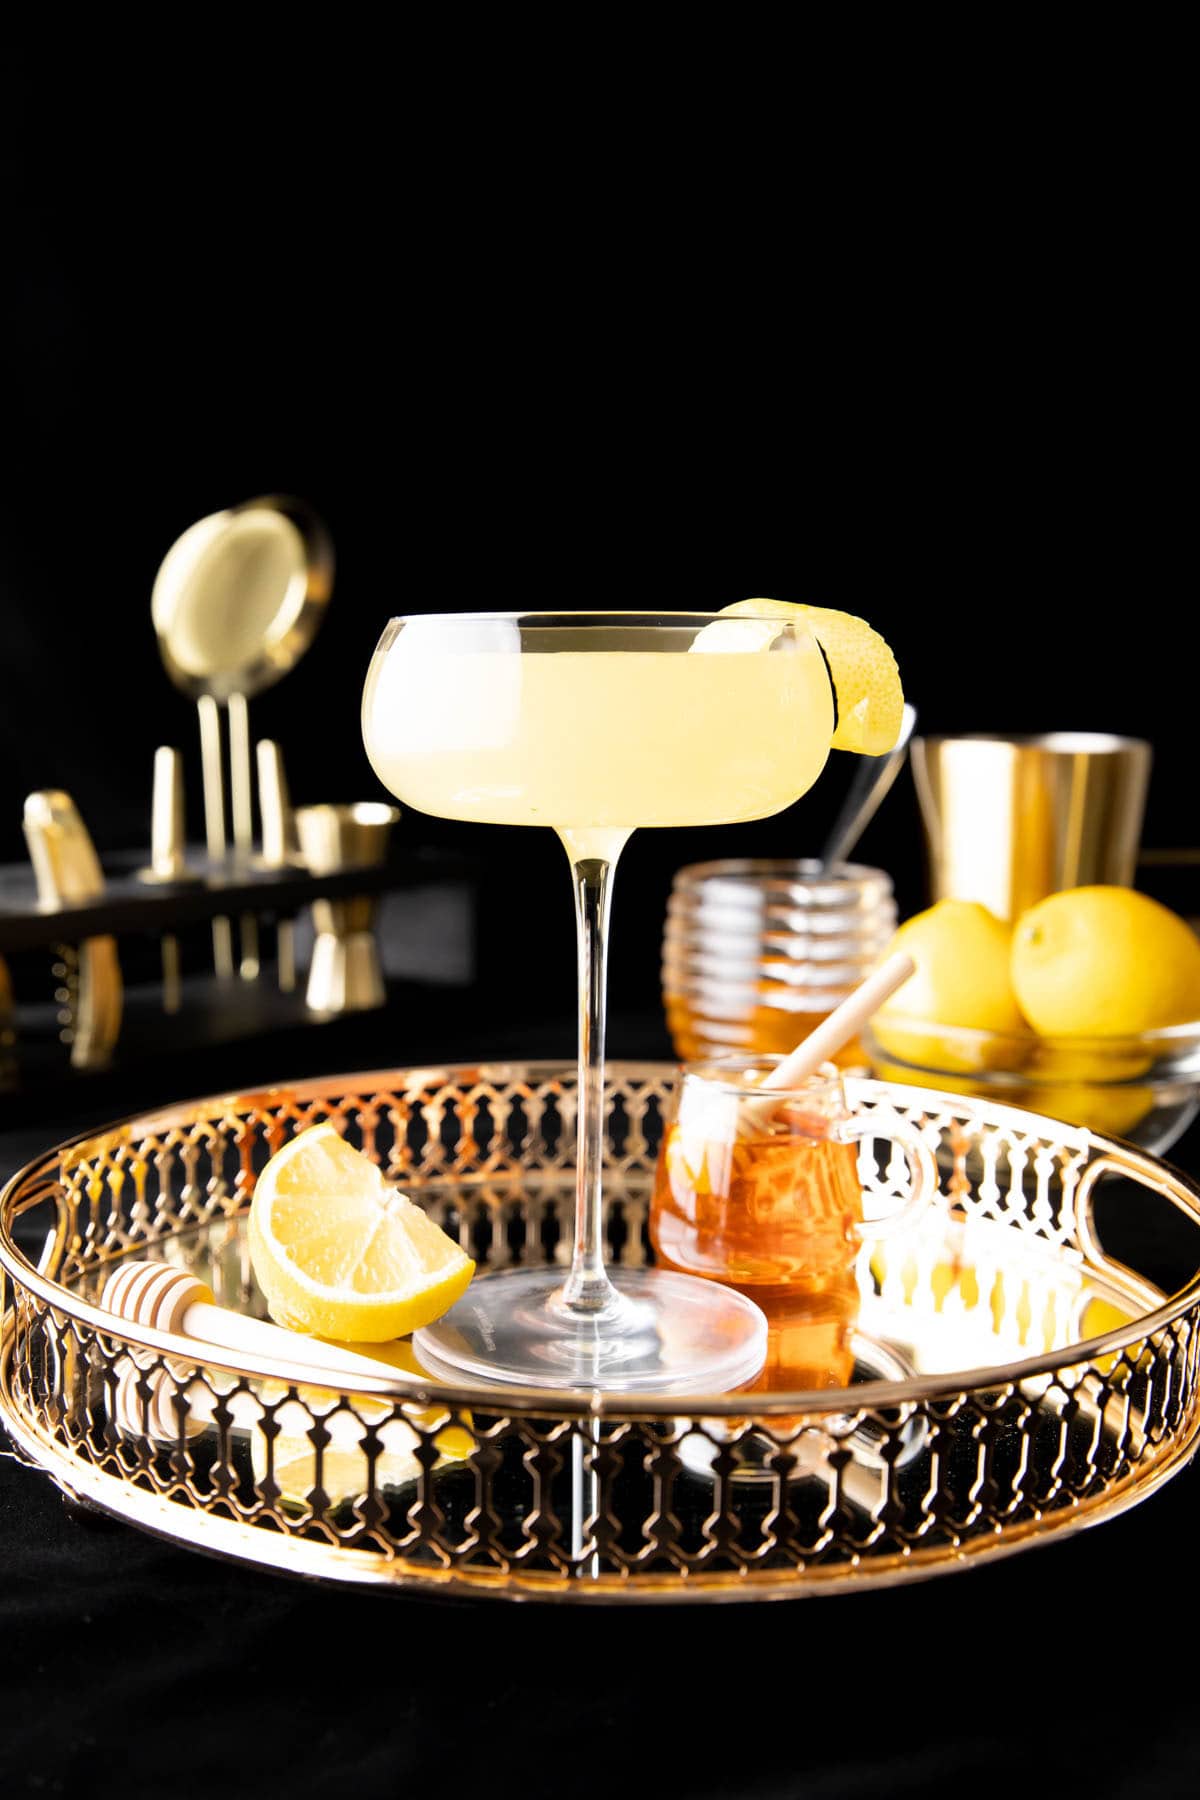 This cocktail recipe served on a tray with lemon and honey